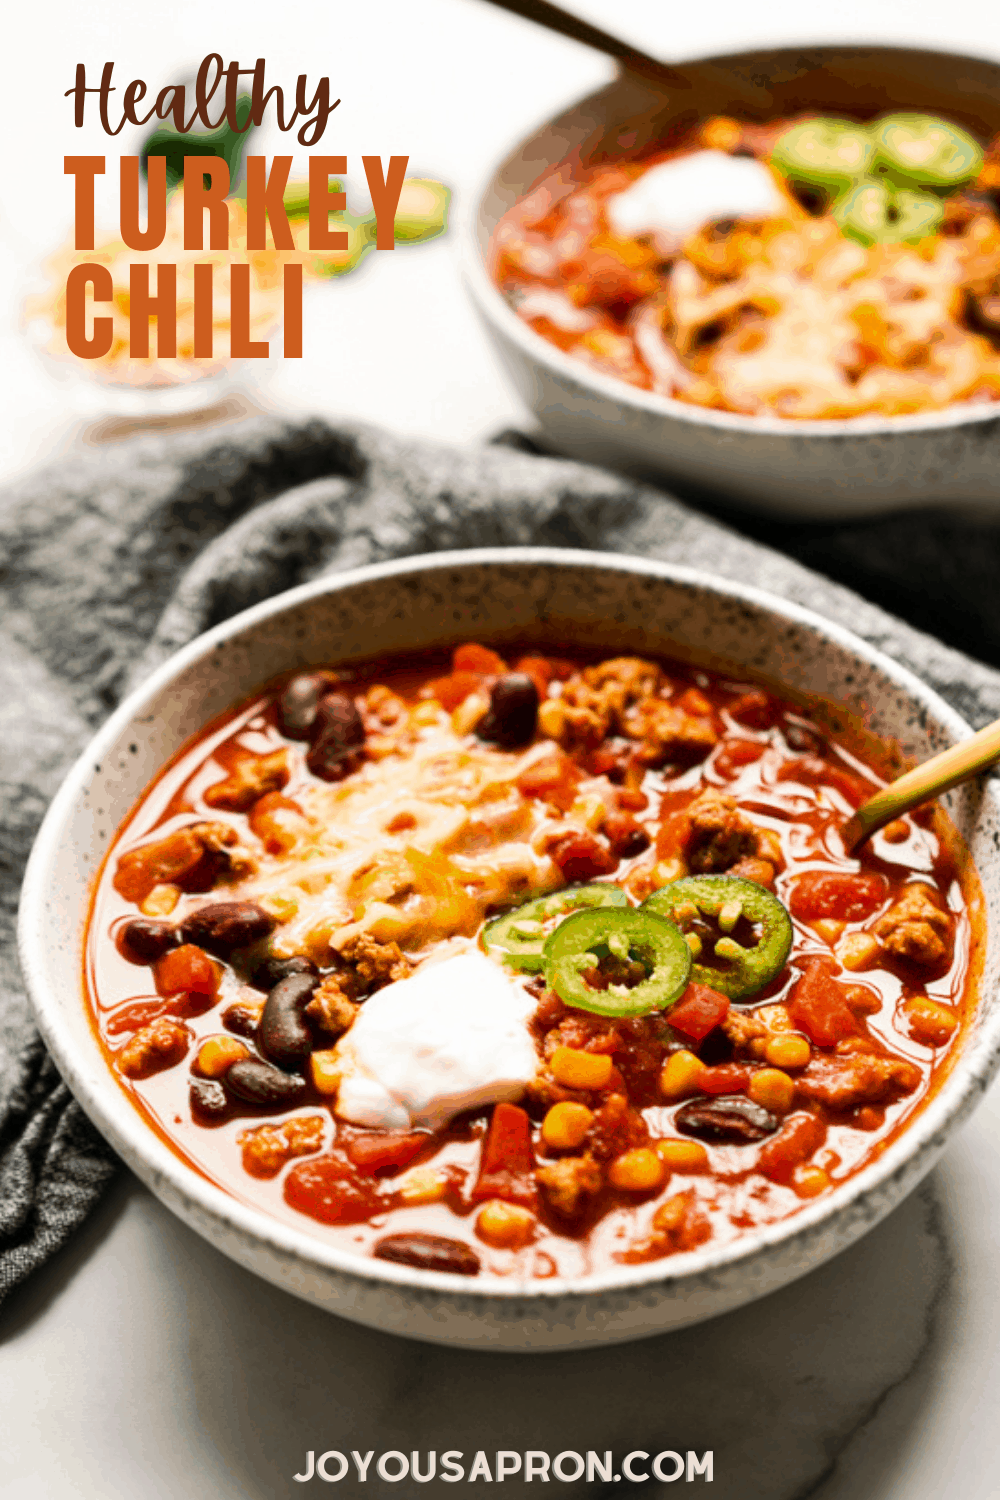 Healthy Turkey Chili - easy dinner recipe - ready in 30 minutes! Made with ground turkey, this tomato-based chili is chunky, cozy, and packed full of bold flavors and great textures. via @joyousapron